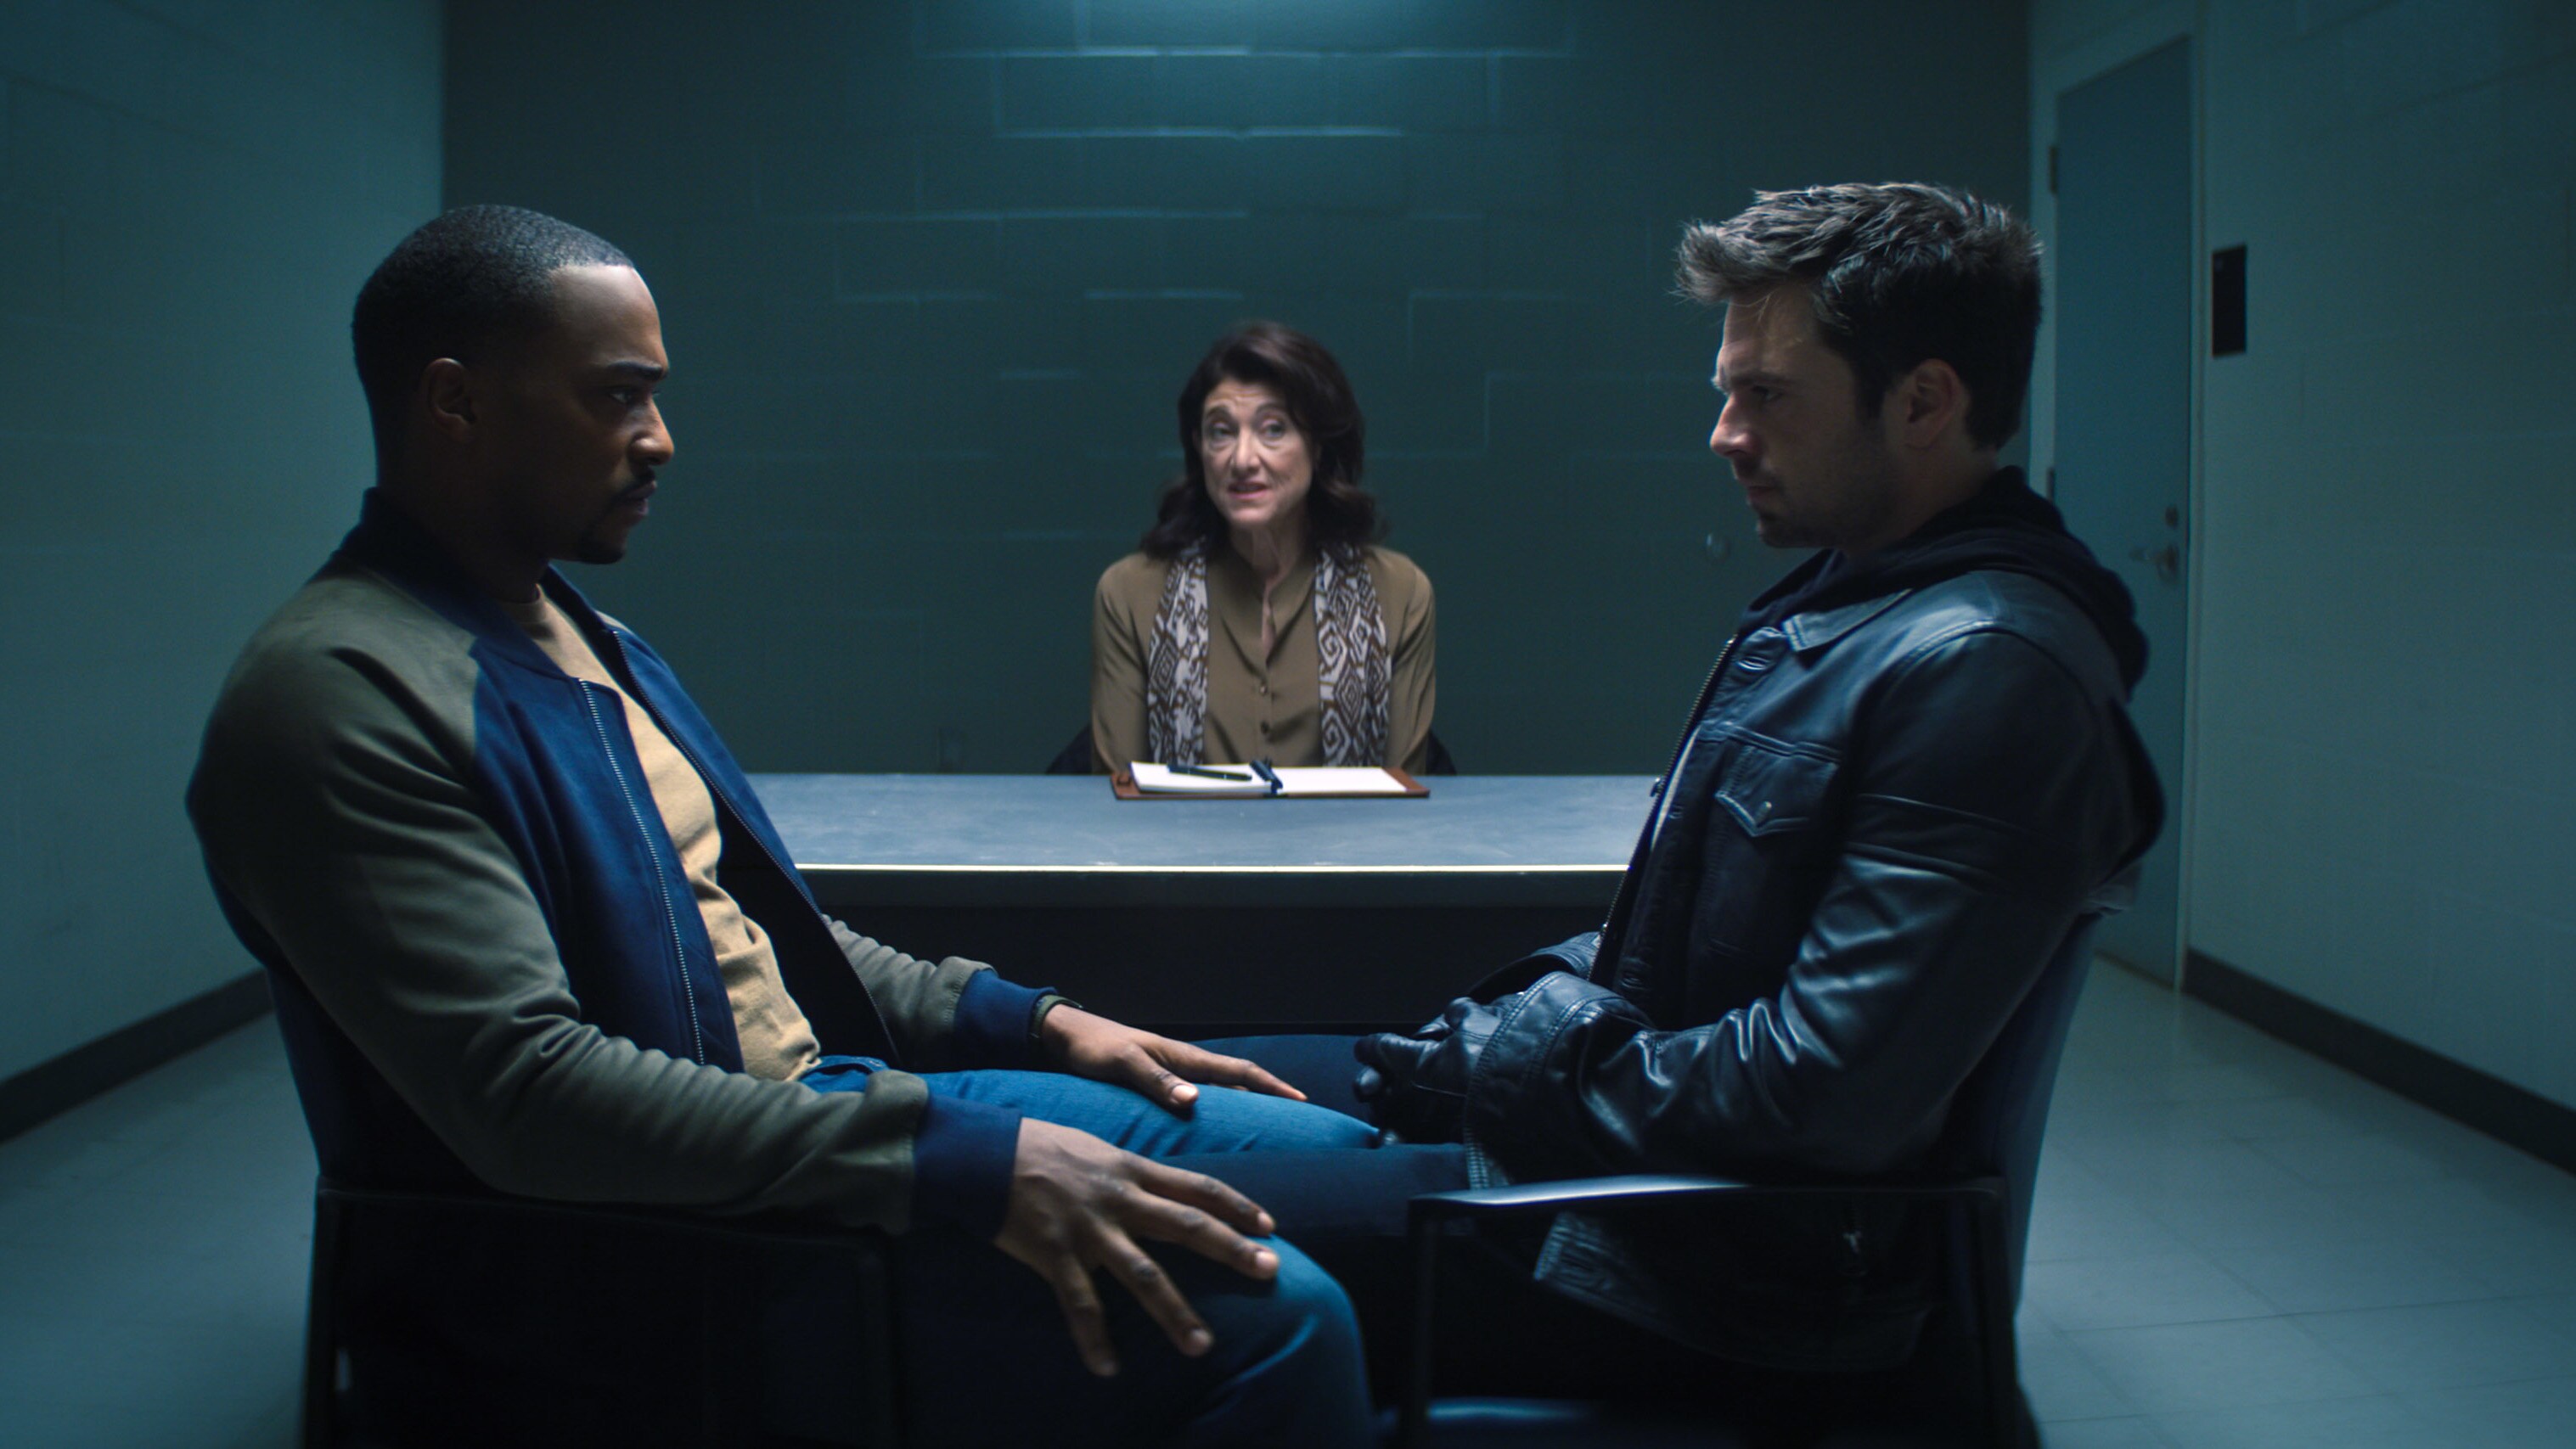 (L-R): Falcon/Sam Wilson (Anthony Mackie), therapist (Amy Aquino) and Winter Soldier/Bucky Barnes (Sebastian Stan) in Marvel Studios' THE FALCON AND THE WINTER SOLDIER exclusively on Disney+. Photo courtesy of Marvel Studios. ©Marvel Studios 2021. All Rights Reserved. 